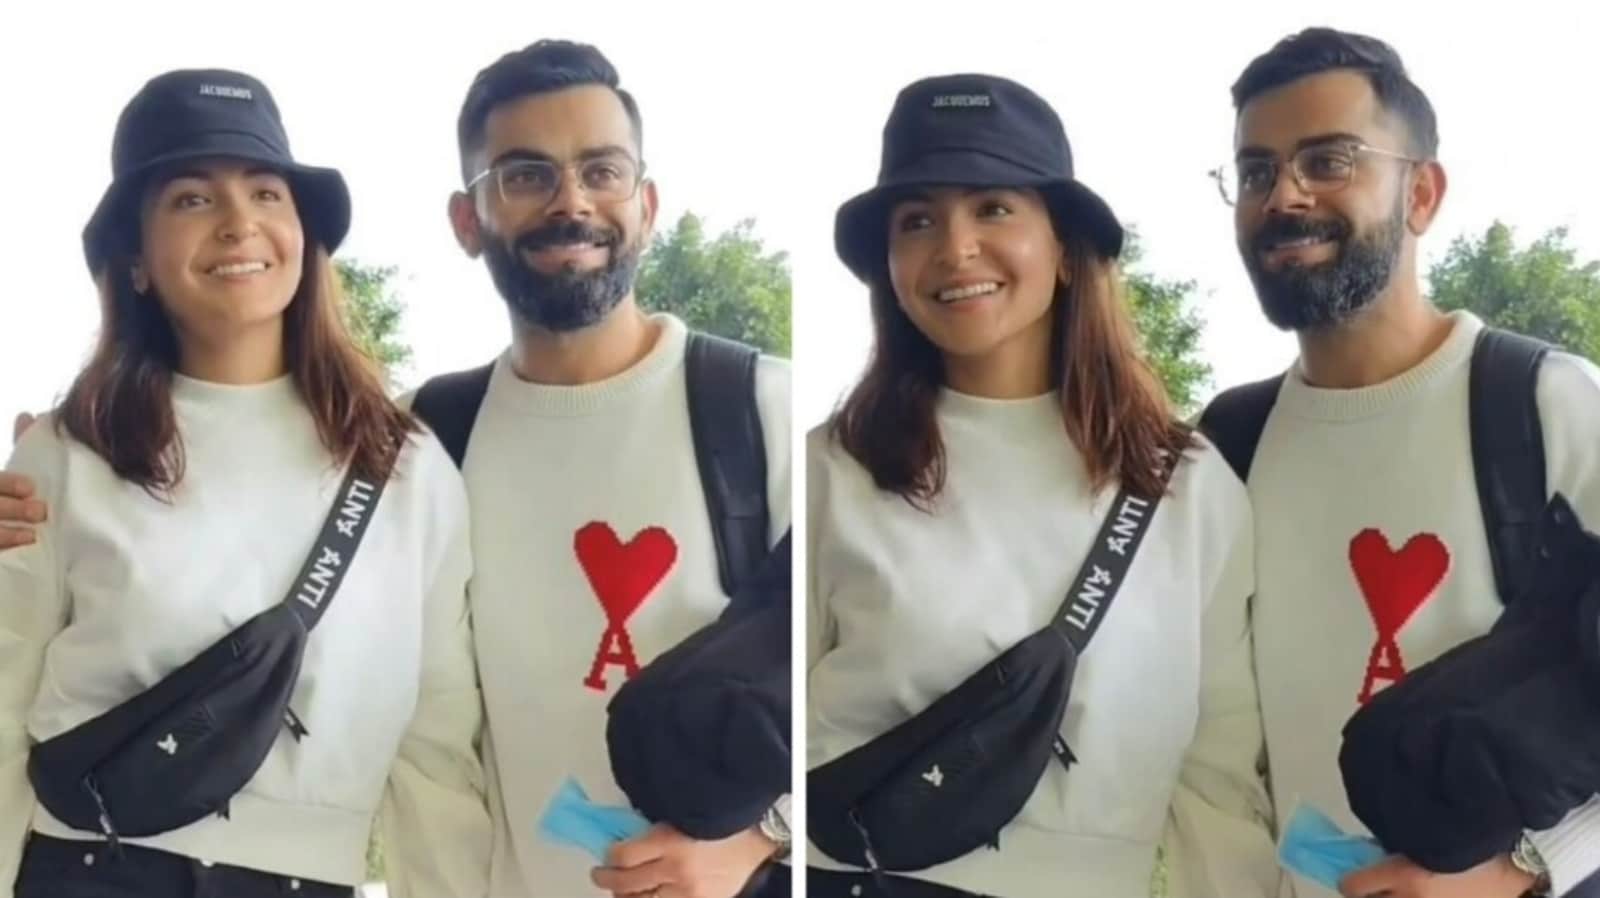 Anushka Sharma twins with Virat Kohli as she holds his hand at airport, fans say ‘couple goals’. Watch